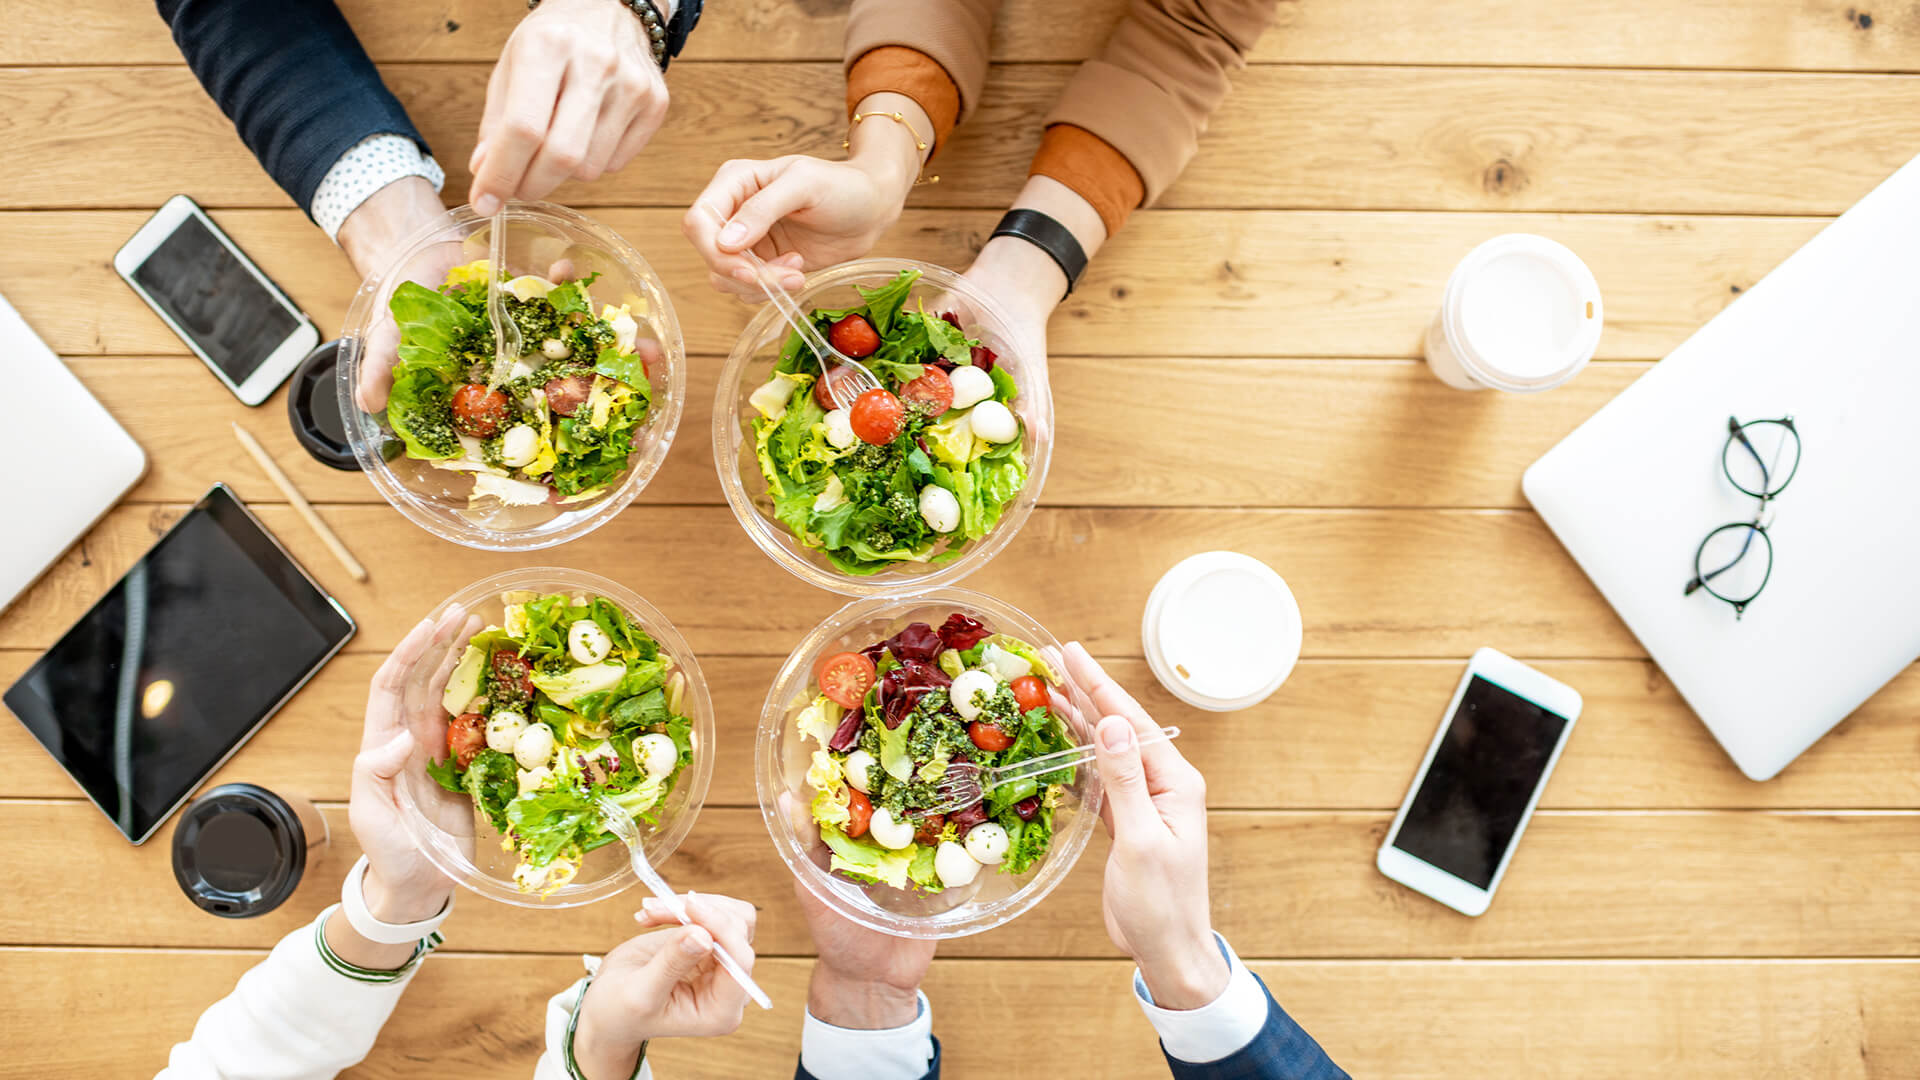 Five Top Tips to Help Employees Adopt Healthier Diets and Promote Health and Wellbeing